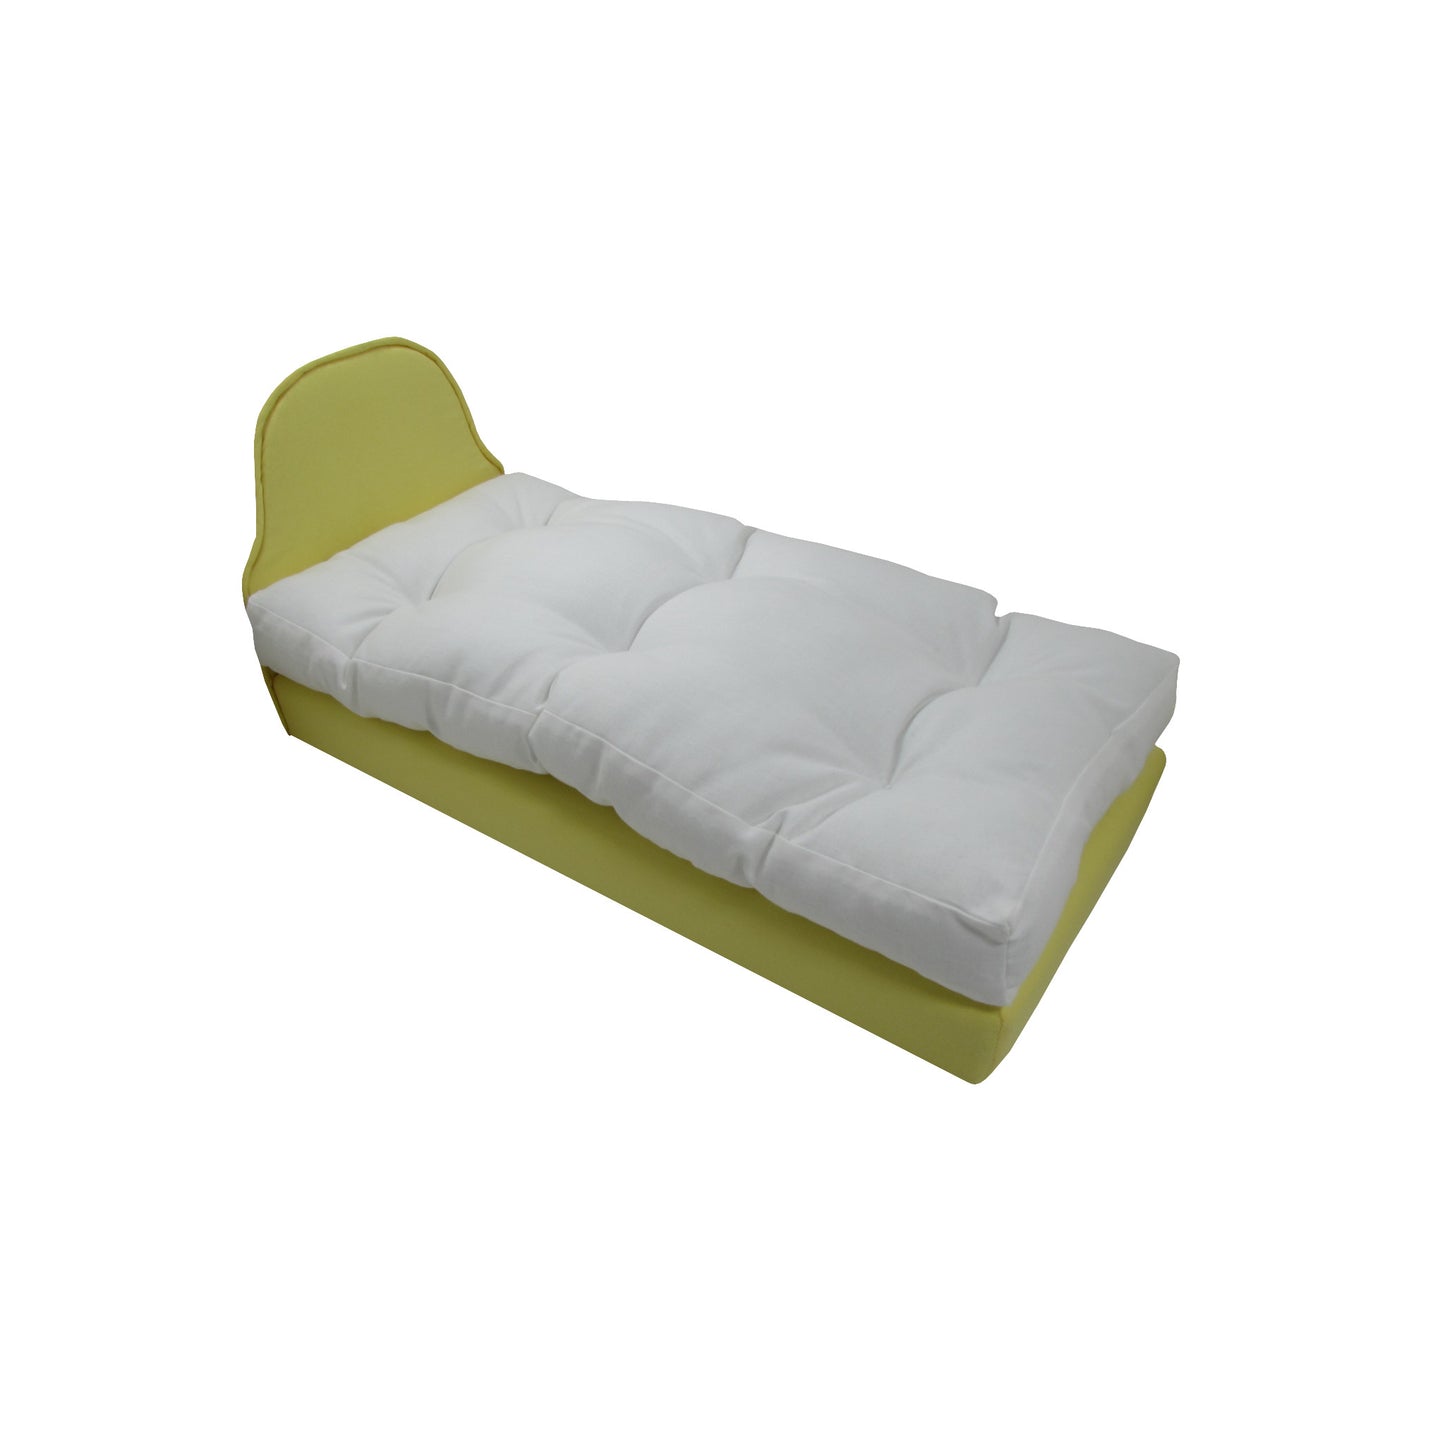 Upholstered Light Yellow Doll Bed for 14.5-inch dolls